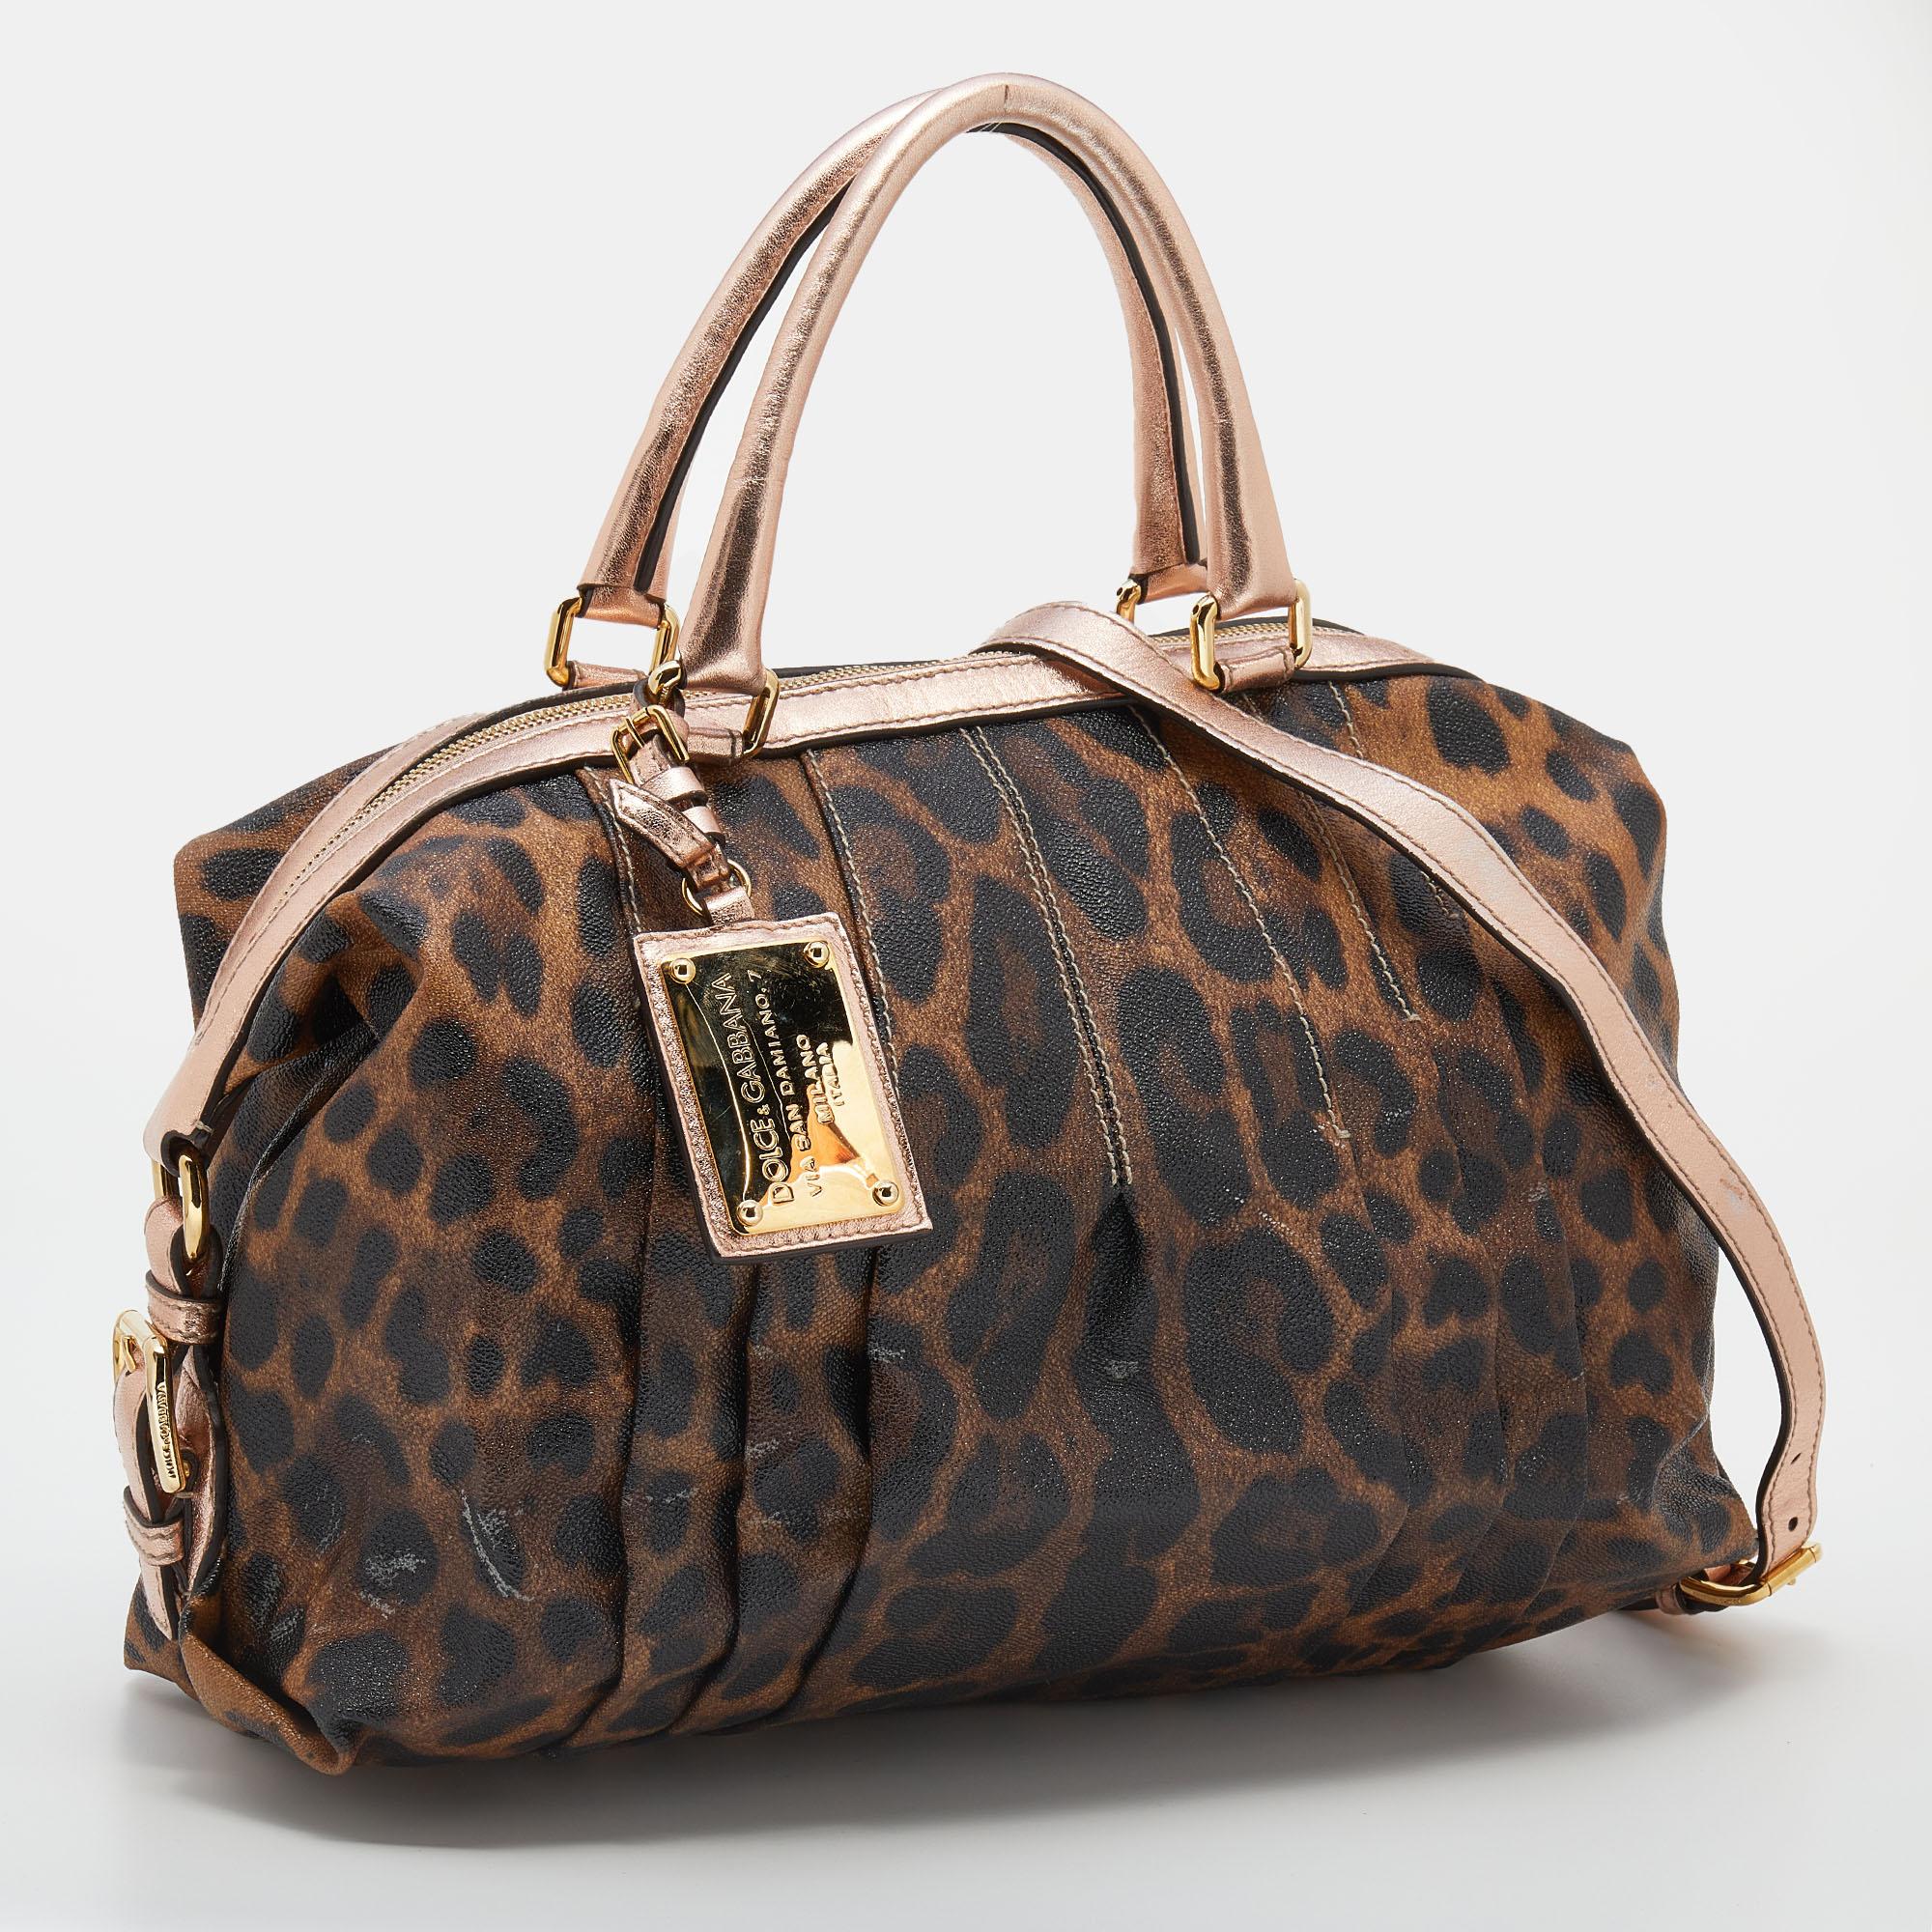 Dolce & Gabbana Brown/Rose Gold Leopard Print Coated Canvas and Leather Satchel In Good Condition For Sale In Dubai, Al Qouz 2